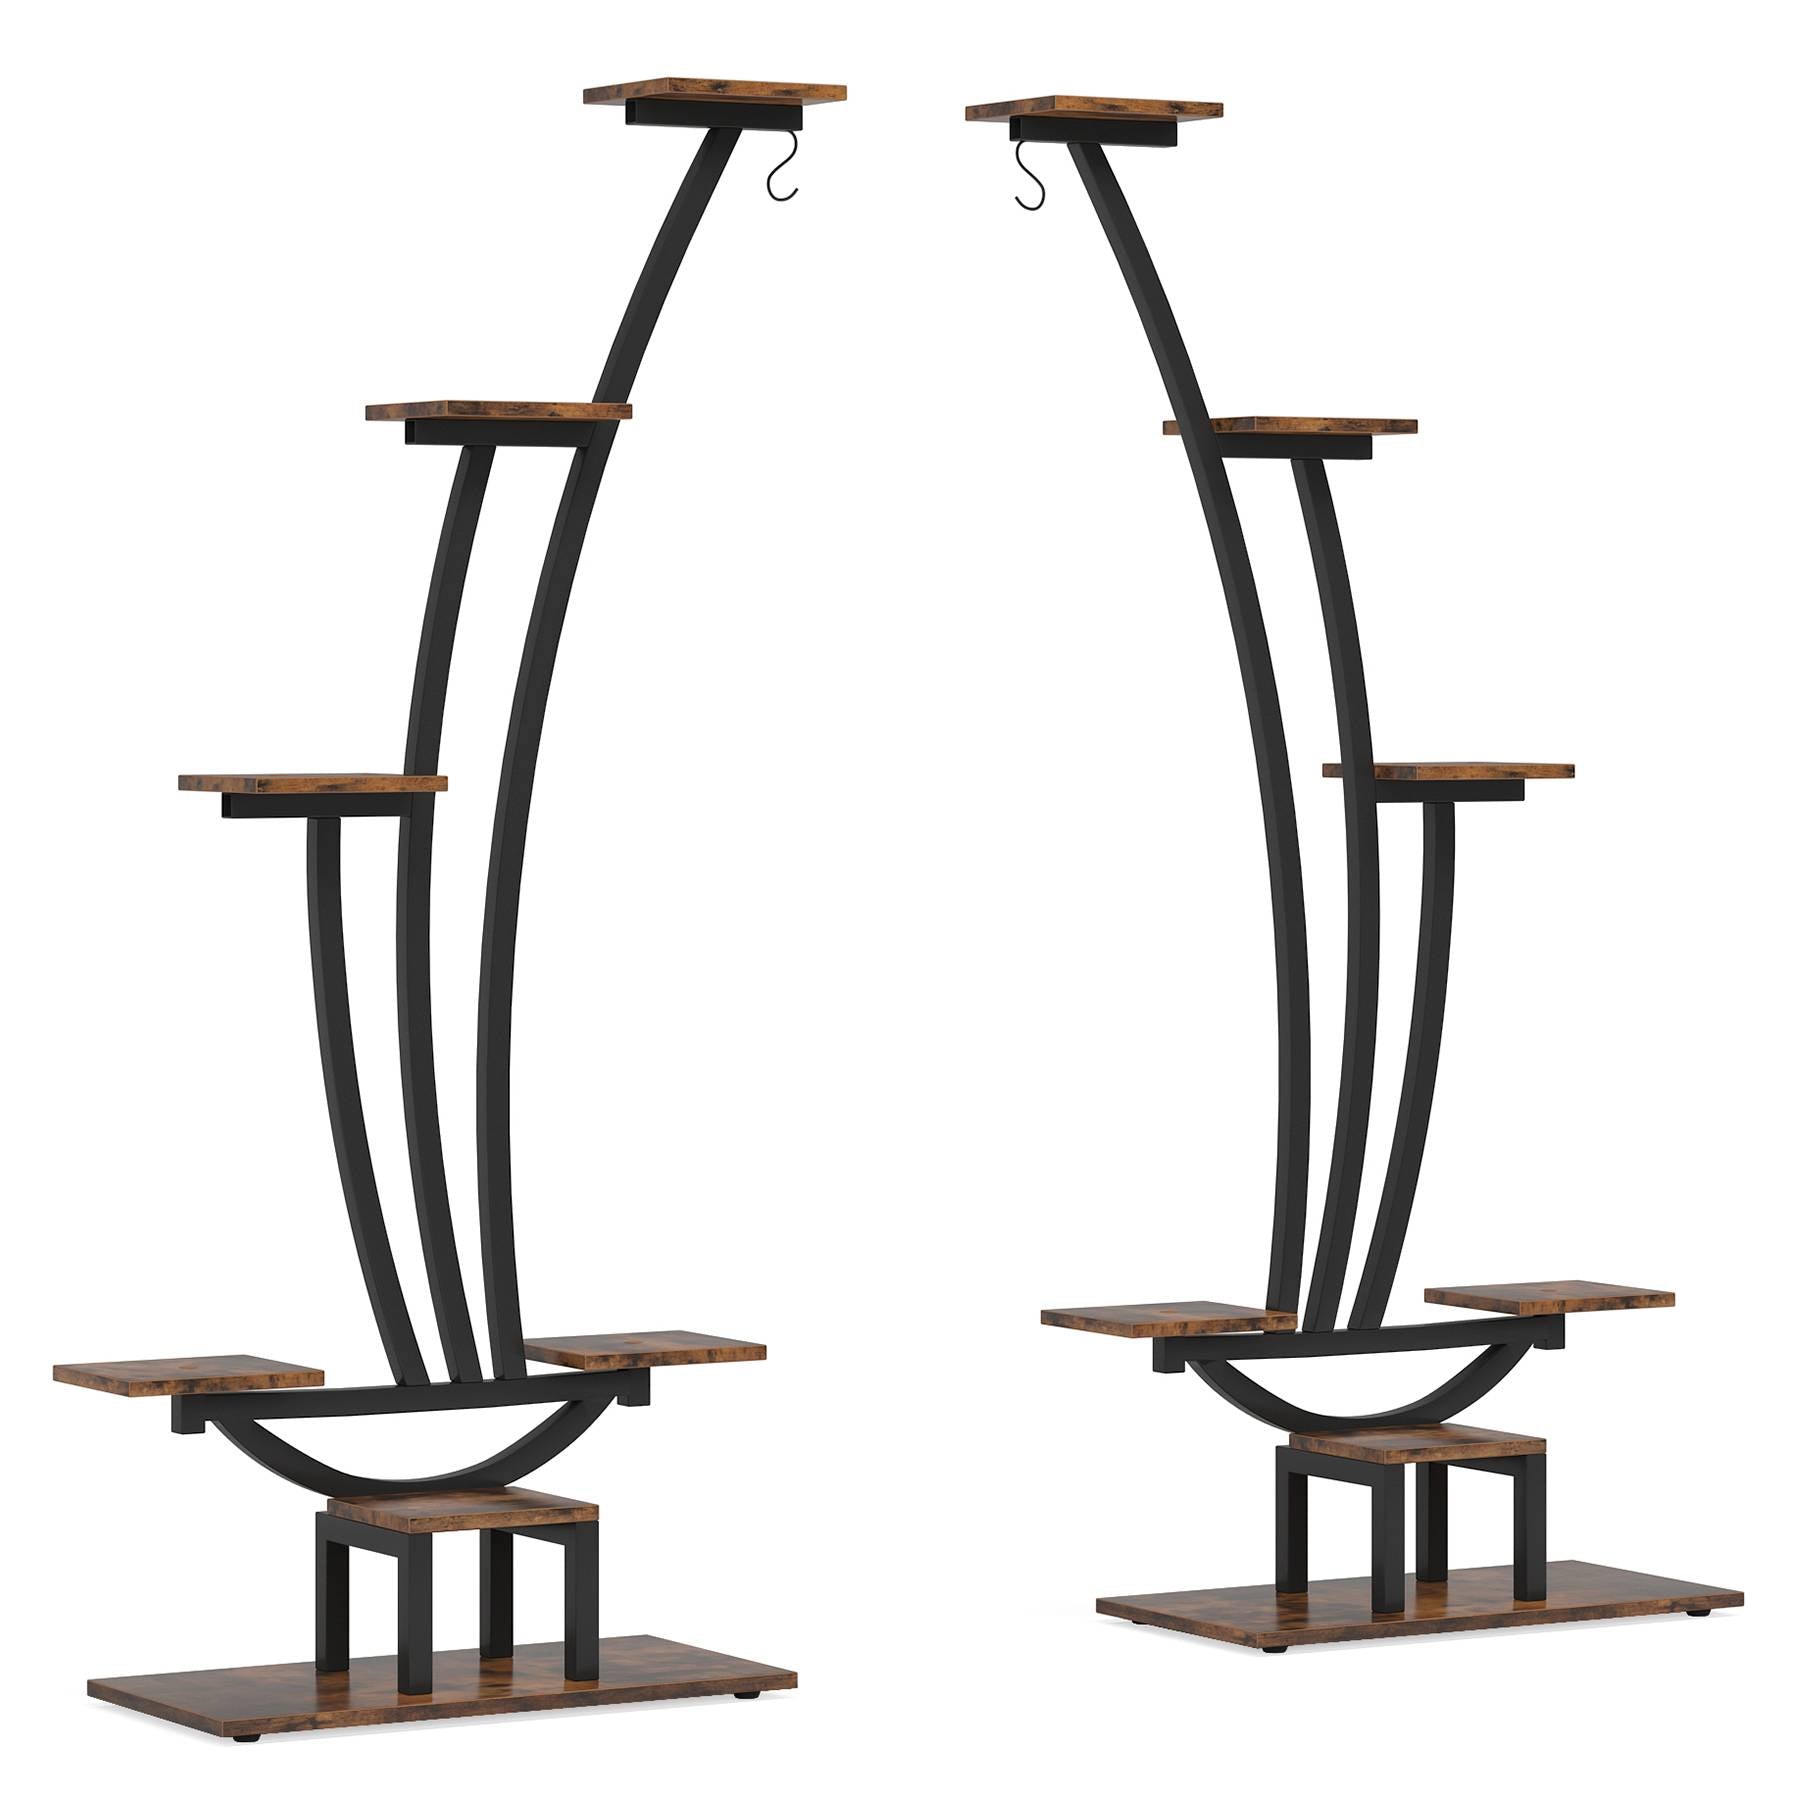 6-Tier Plant Stand Pack of 2, Metal Curved Display Shelf with 2 Hanging Hooks